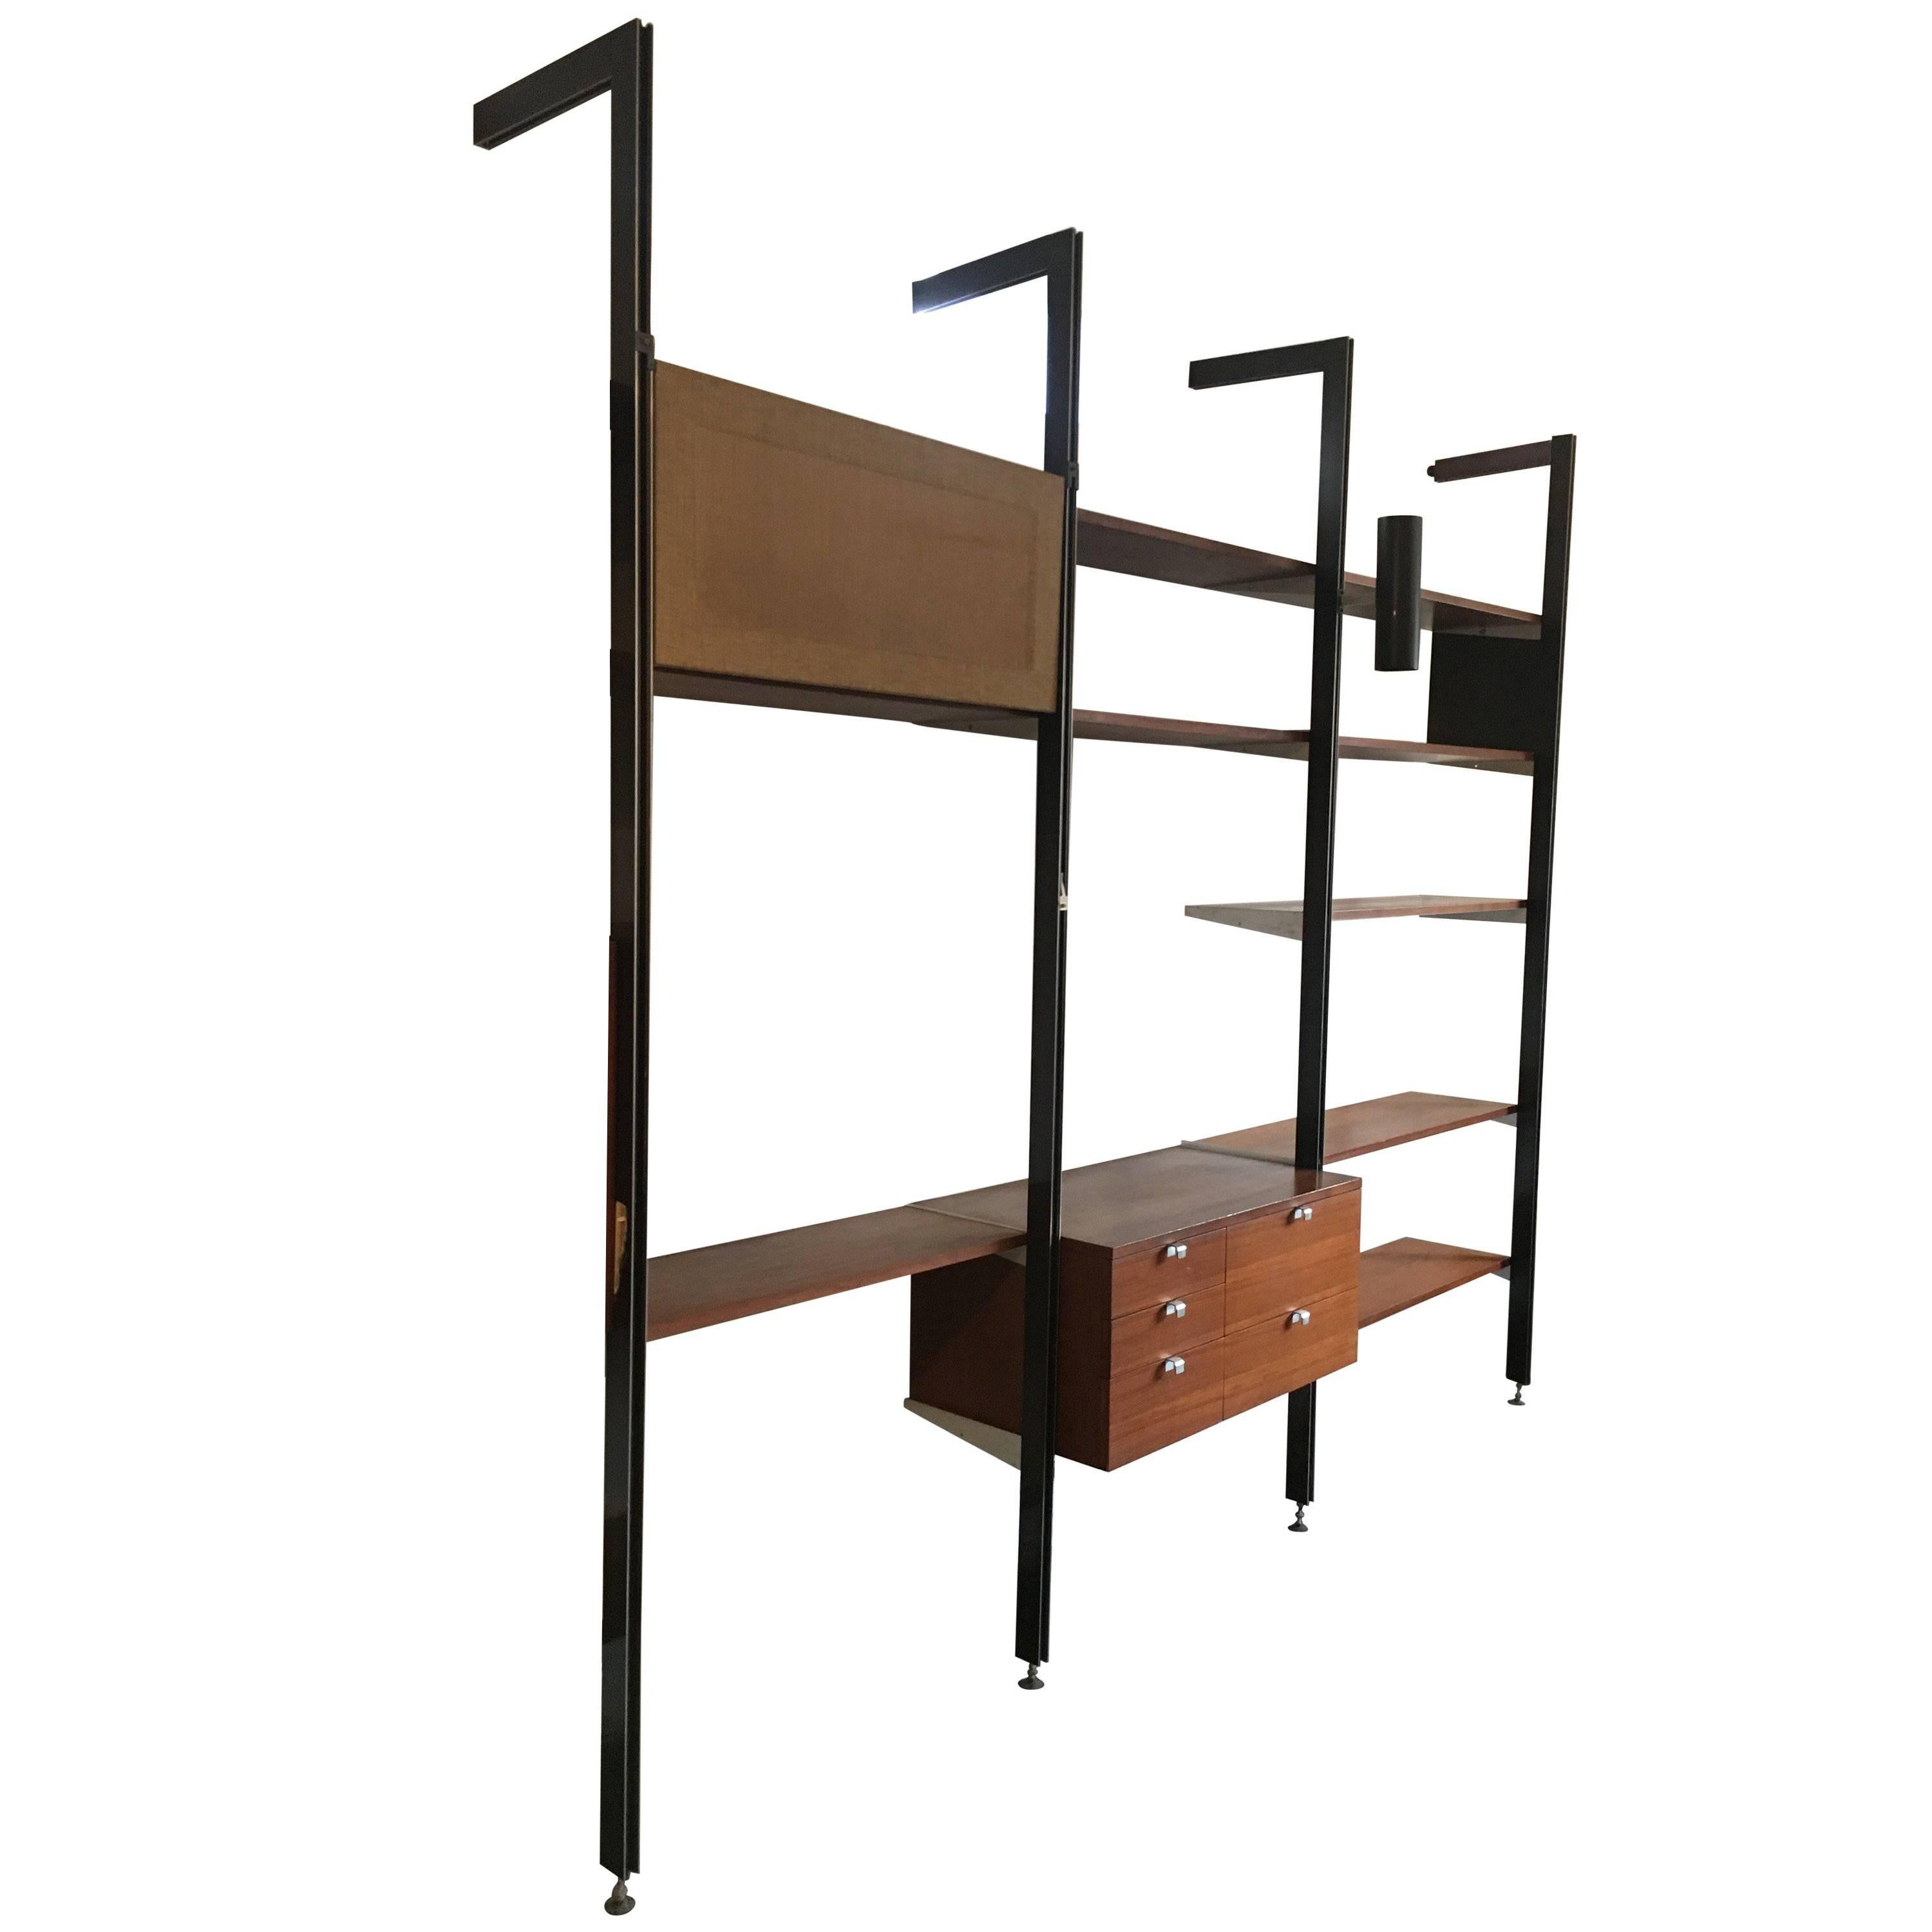 George Nelson Three Bay CSS Shelving Unit by Herman Miller, circa 1960